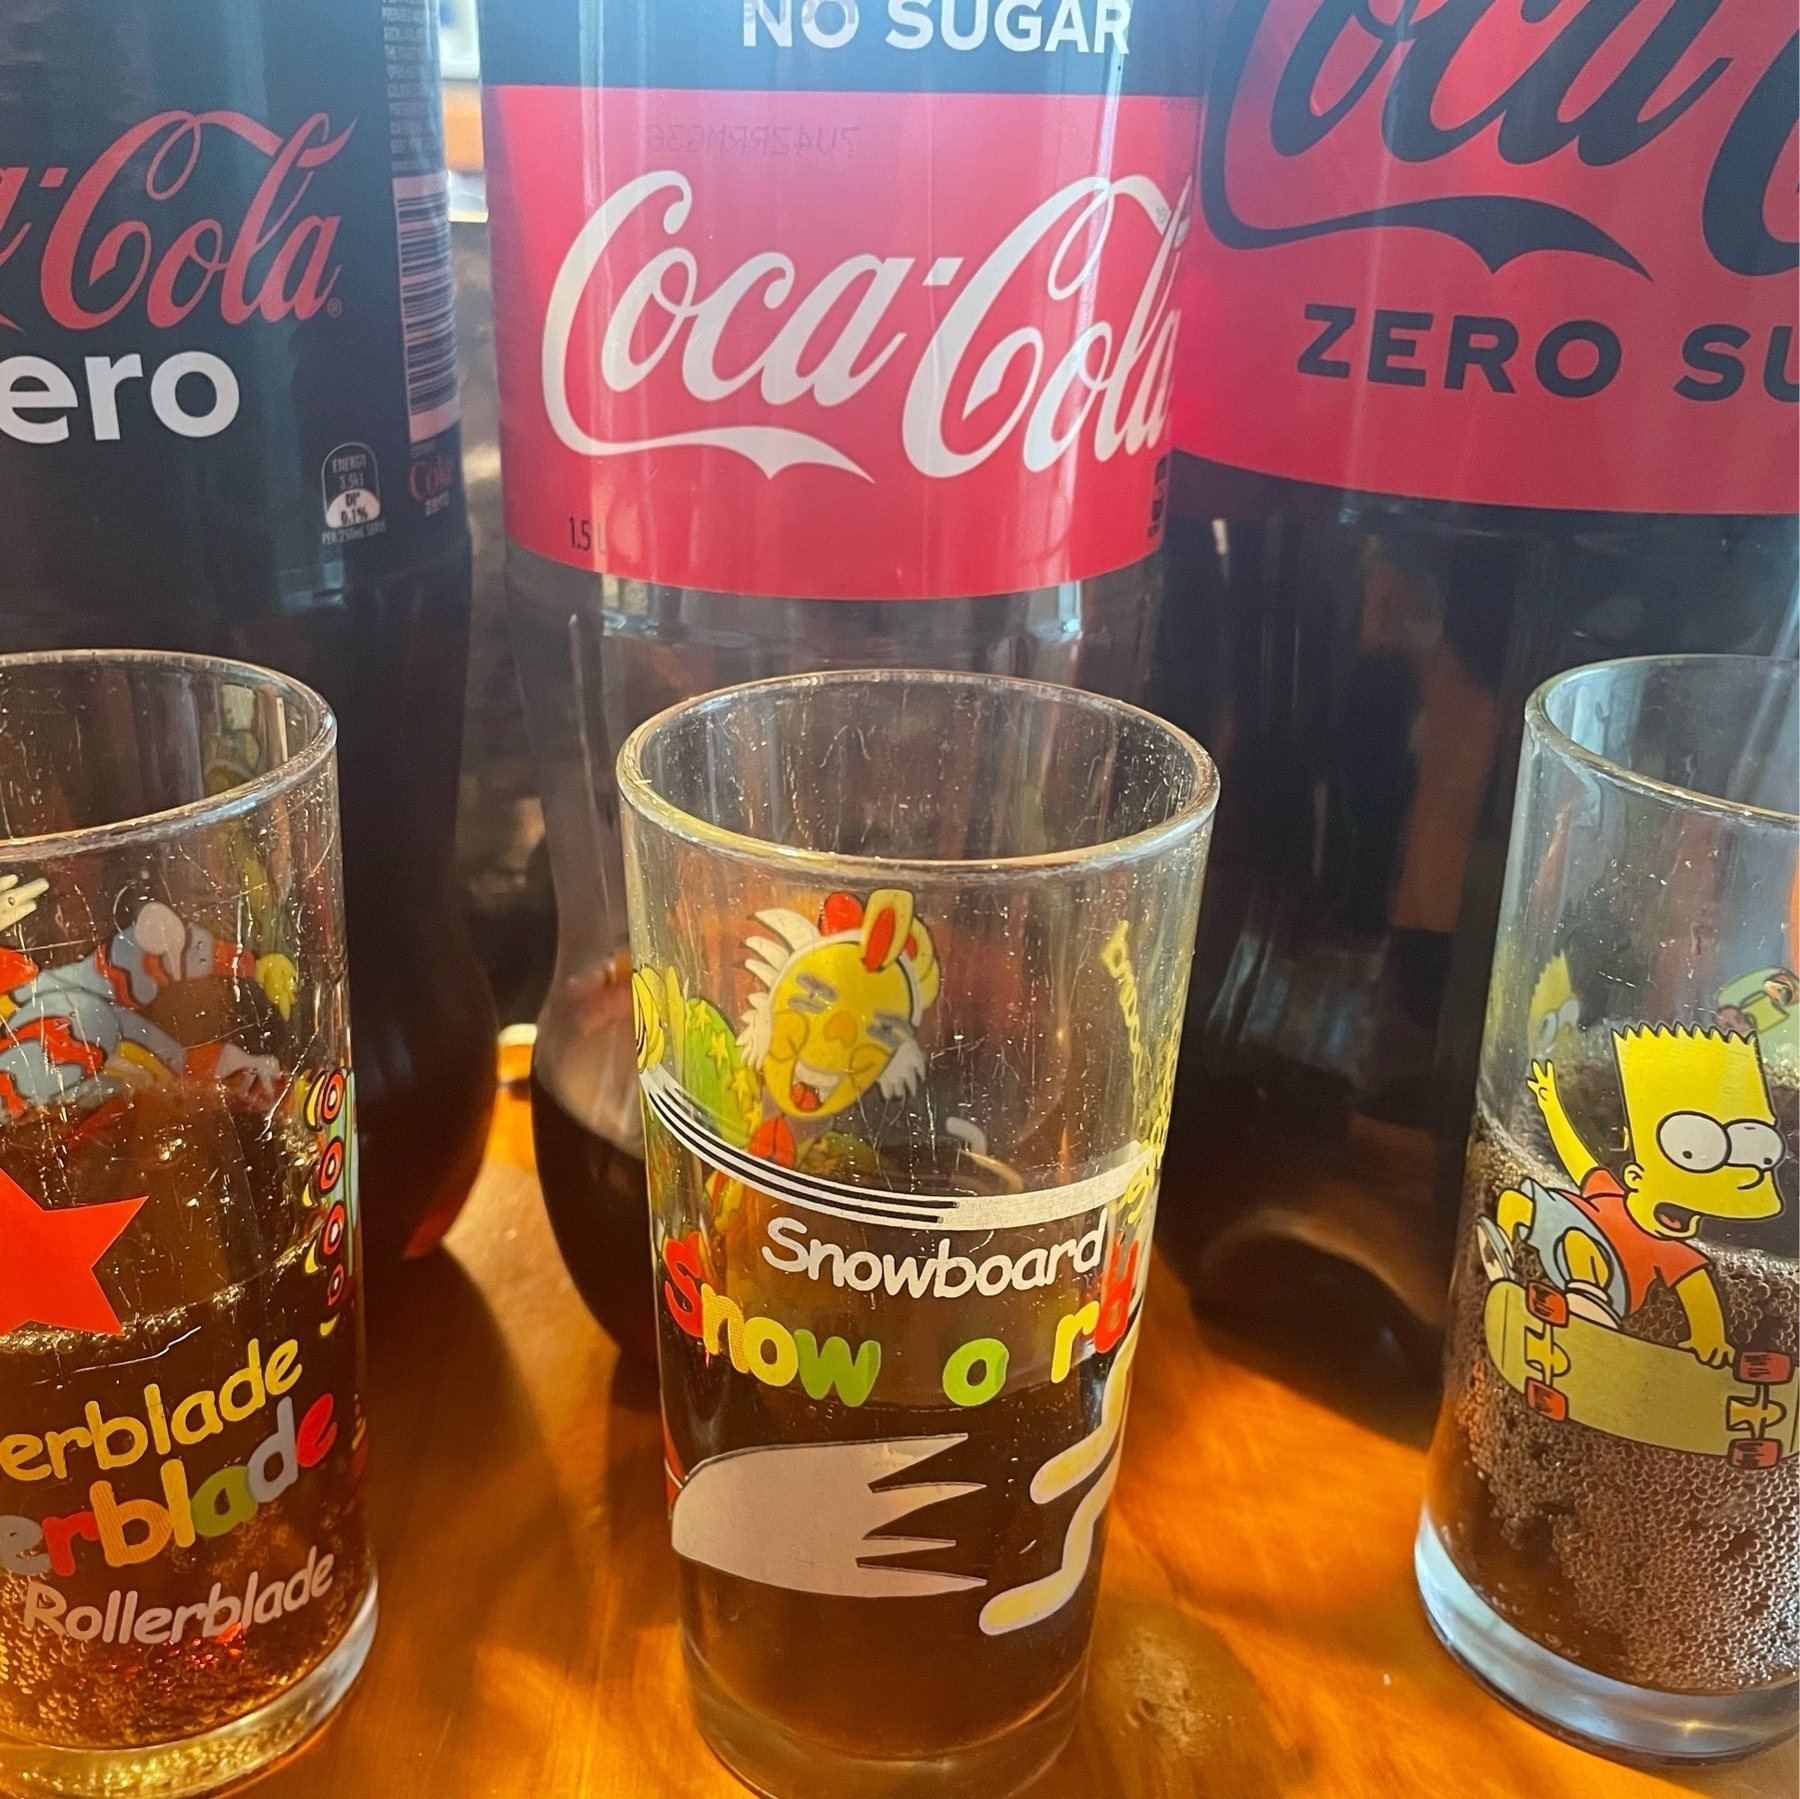 From left to right, a bottle of Coke Zero, Coke No Sugar and Coke Zero Sugar. each bottle has a small glass in front if it with a sample in it. 